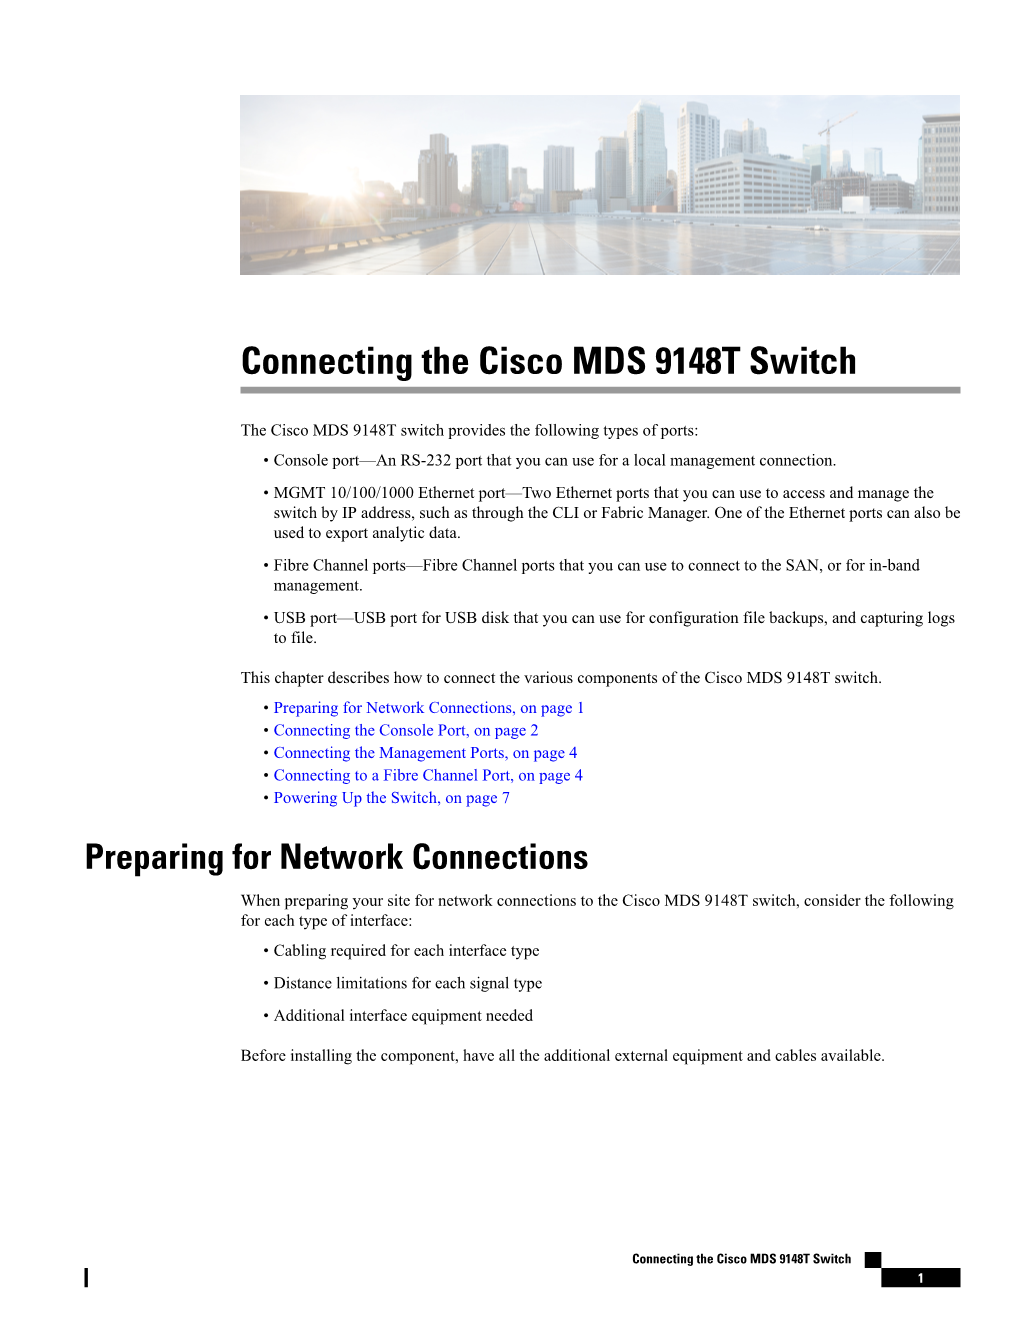 Connecting the Cisco MDS 9148T Switch